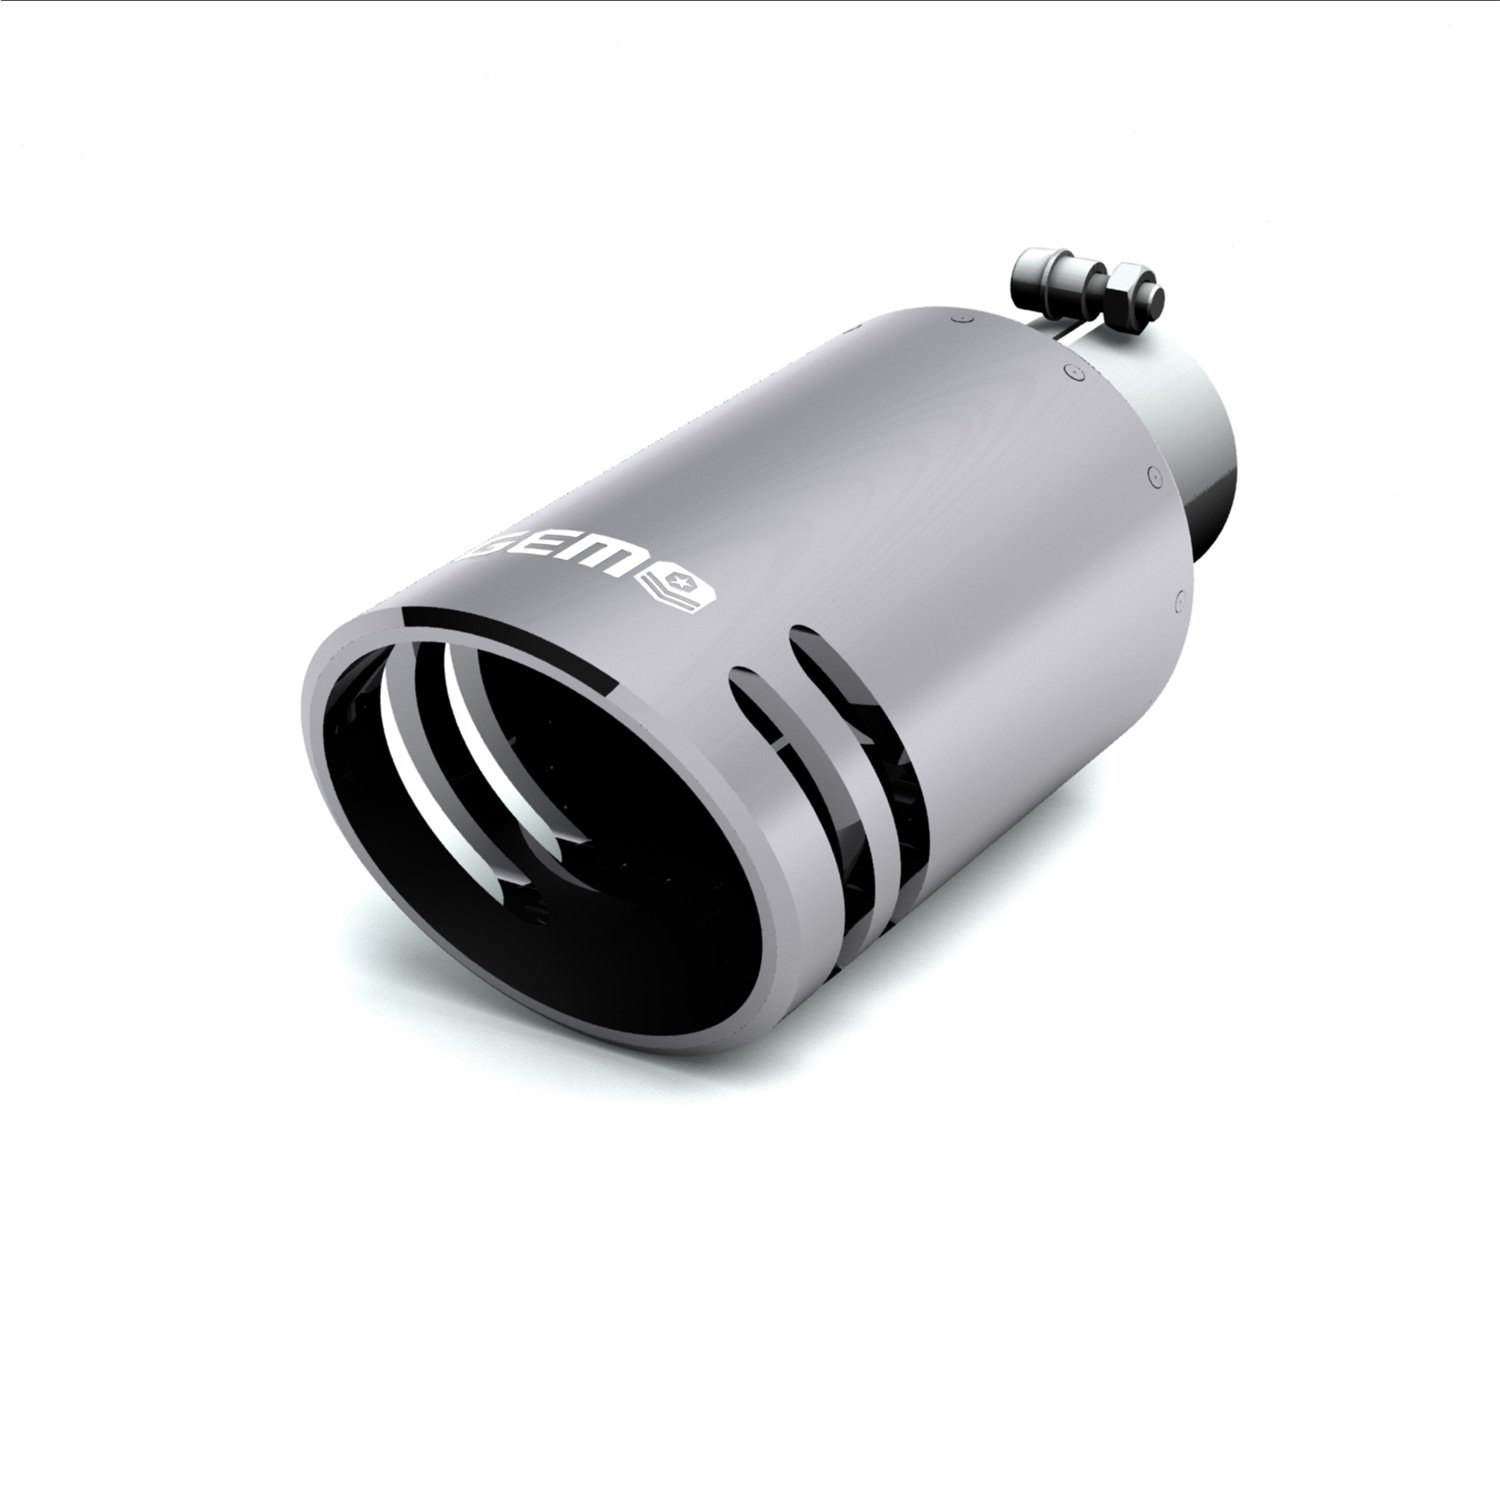 GEM Billet Exhaust Tip, 3.5 in. Inlet/5 in. Outlet x 12 in. Length, Aluminum/304 Stainless Steel, SILENCER Cut [Chrome Finish]